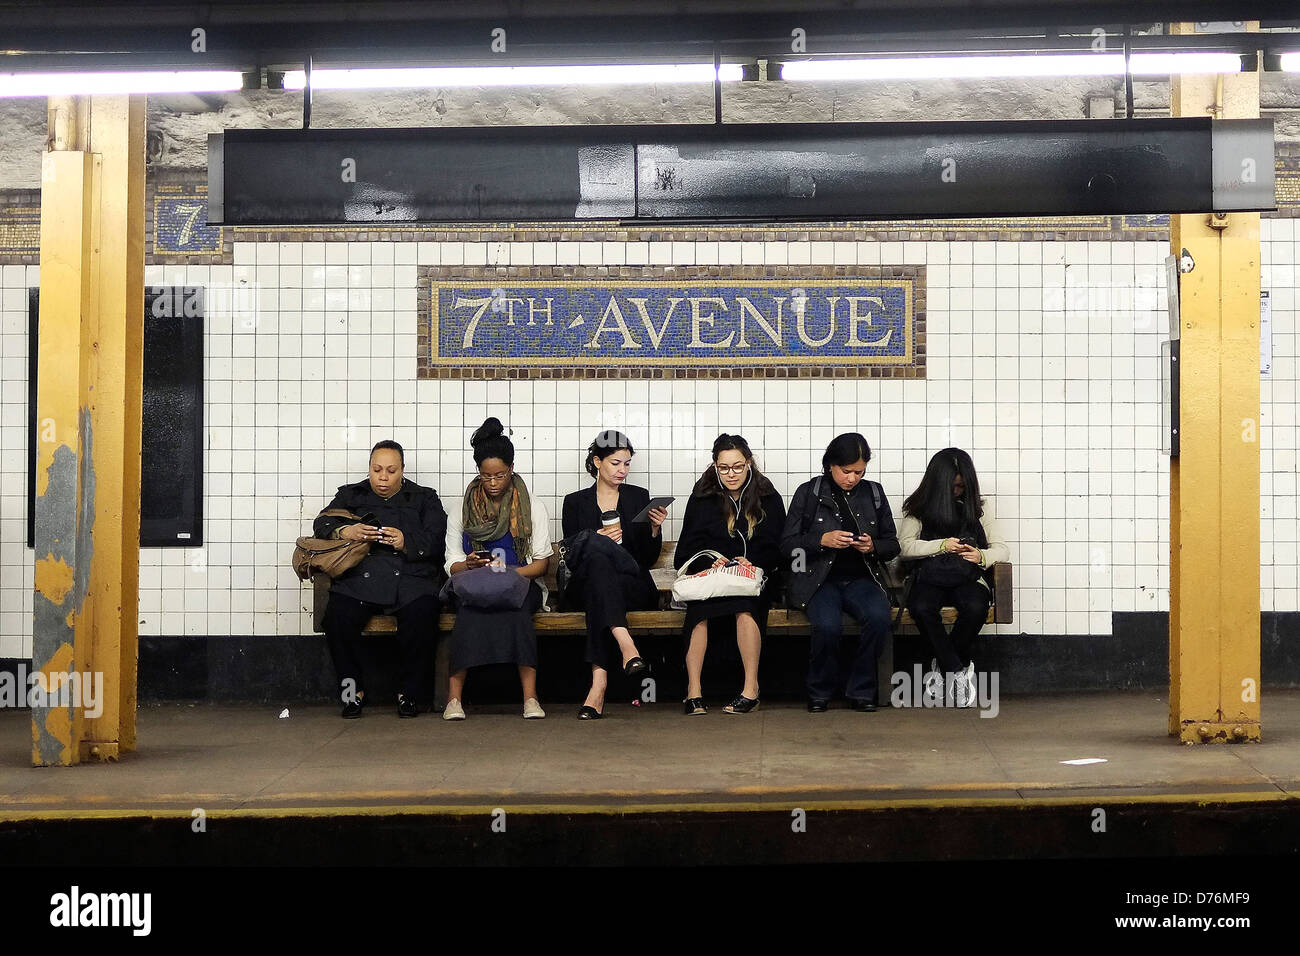 Passengers wait for a train on the platform of the 7th Avenue subway station in Brooklyn, New York City. Stock Photo